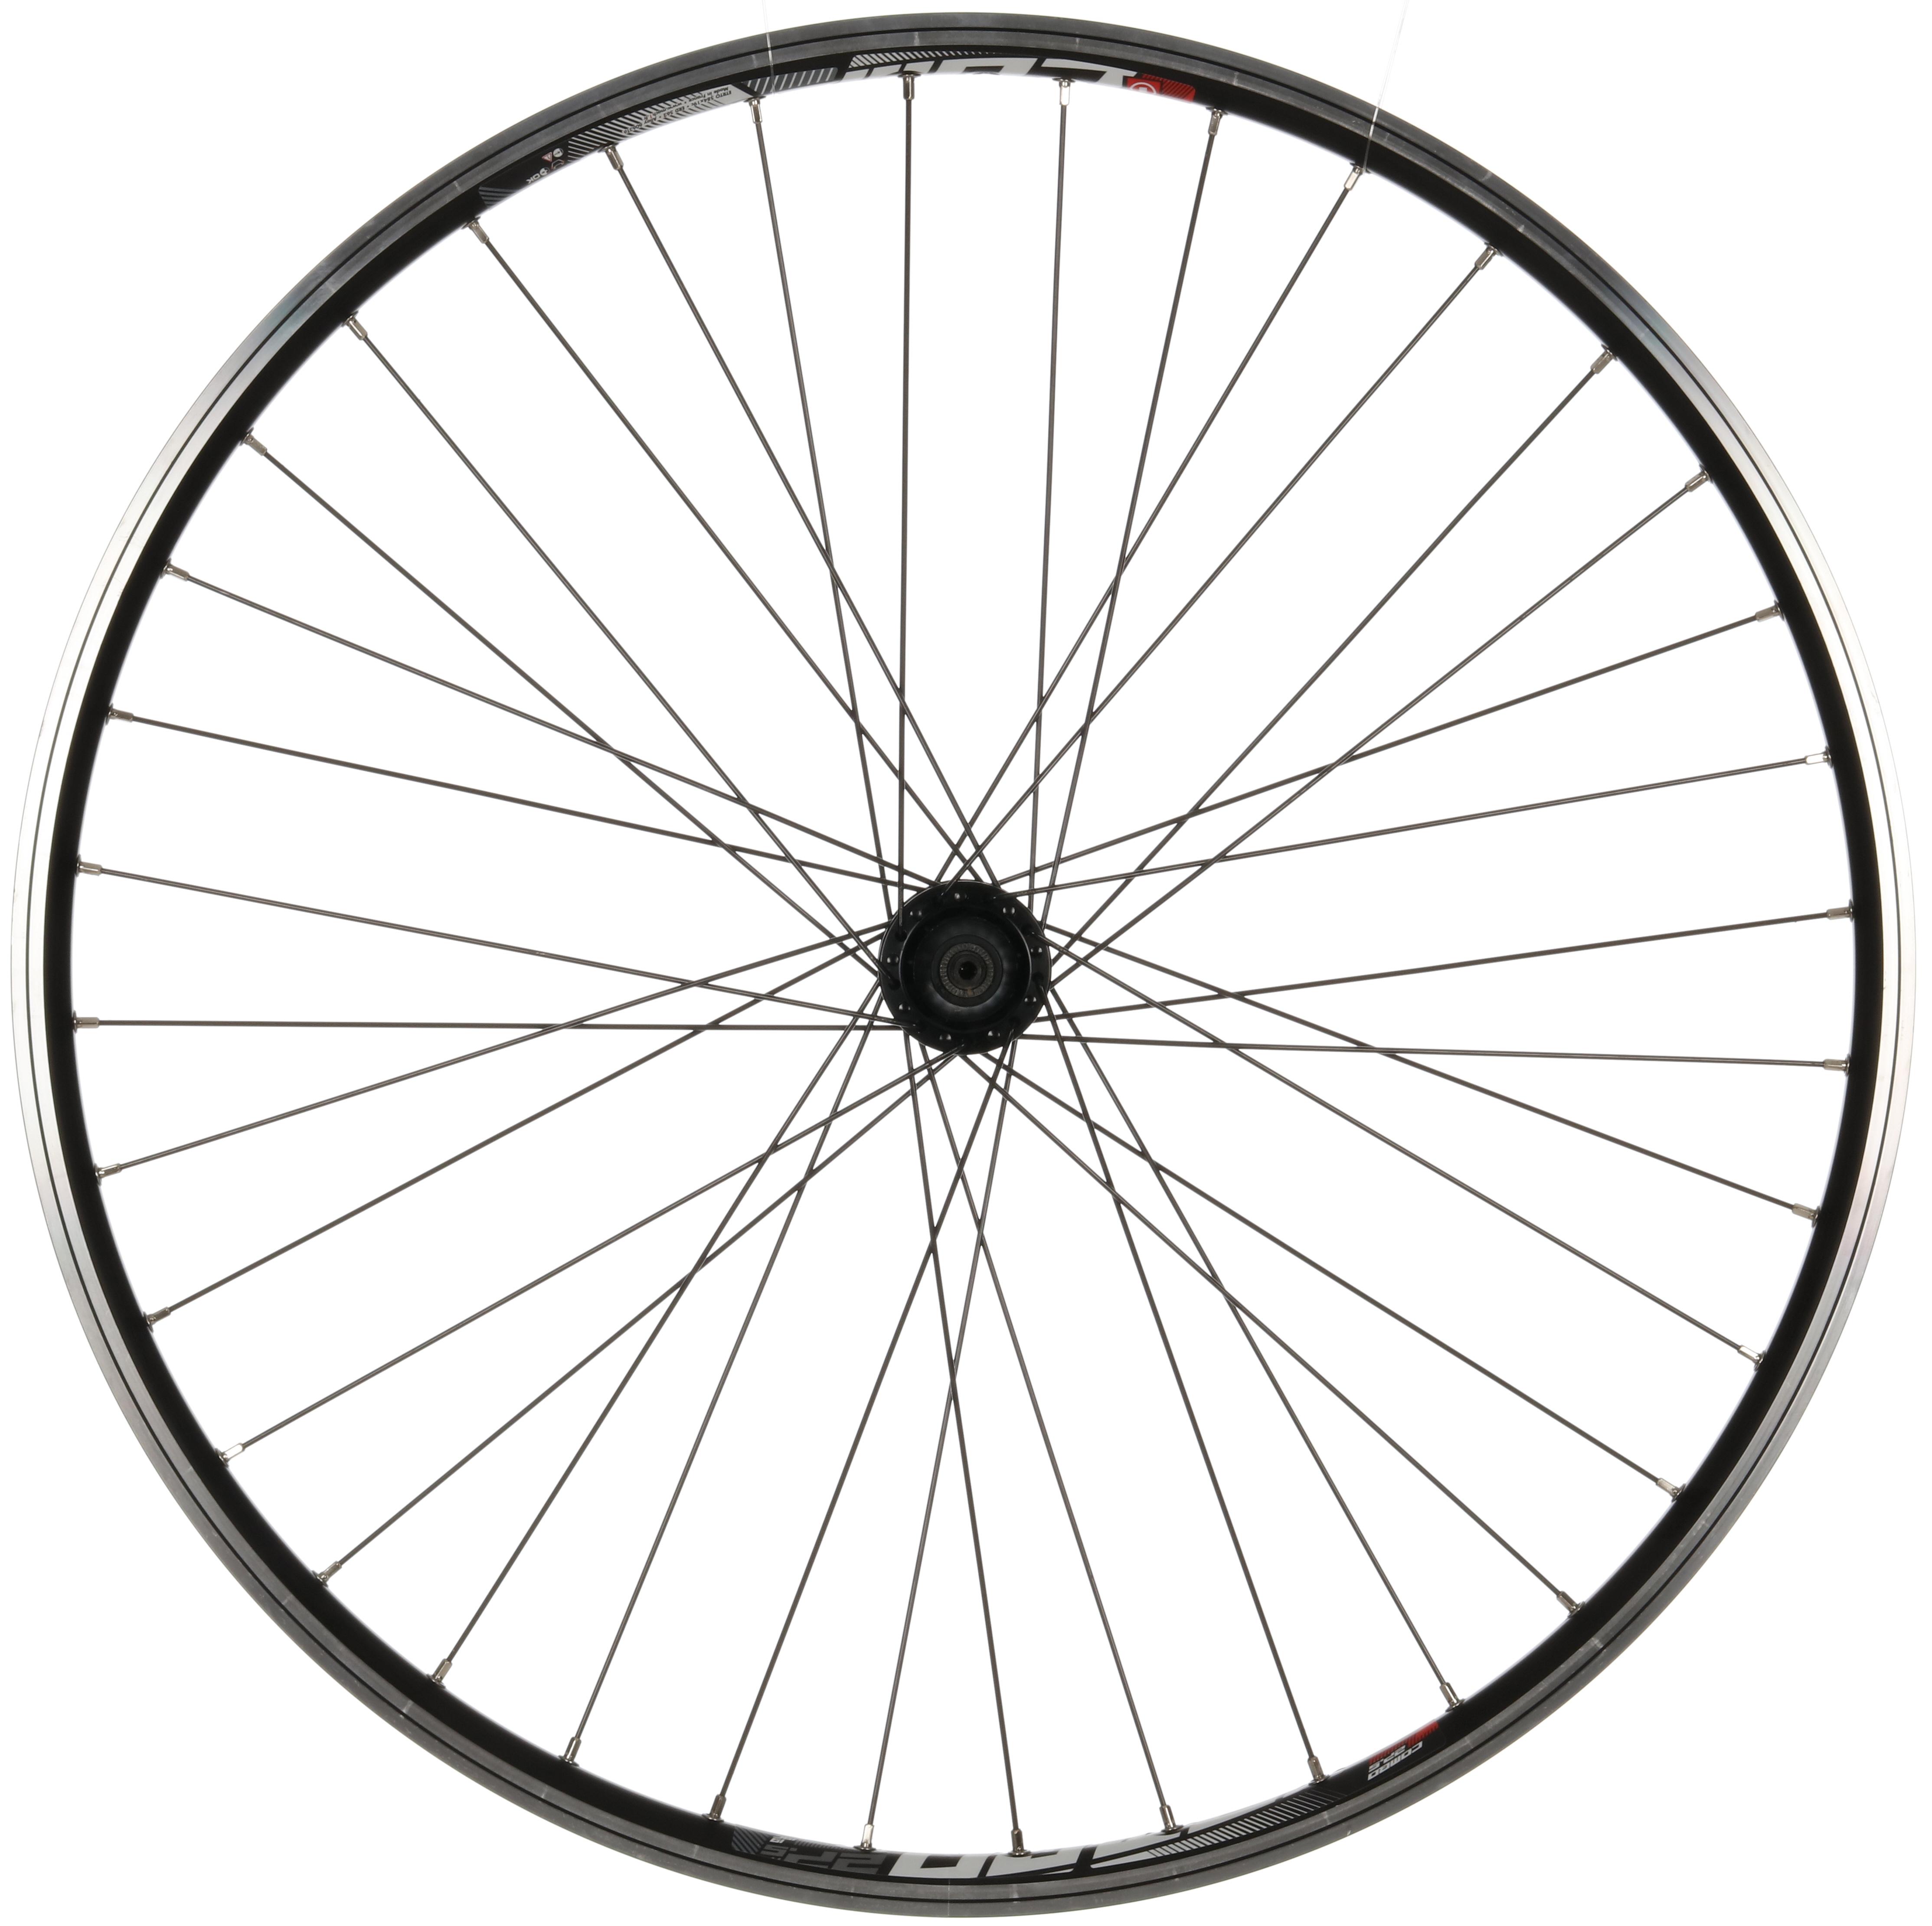 Raleigh 27.5 Inch Rear Wheel, 8/9 Speed, Quick Release Axle